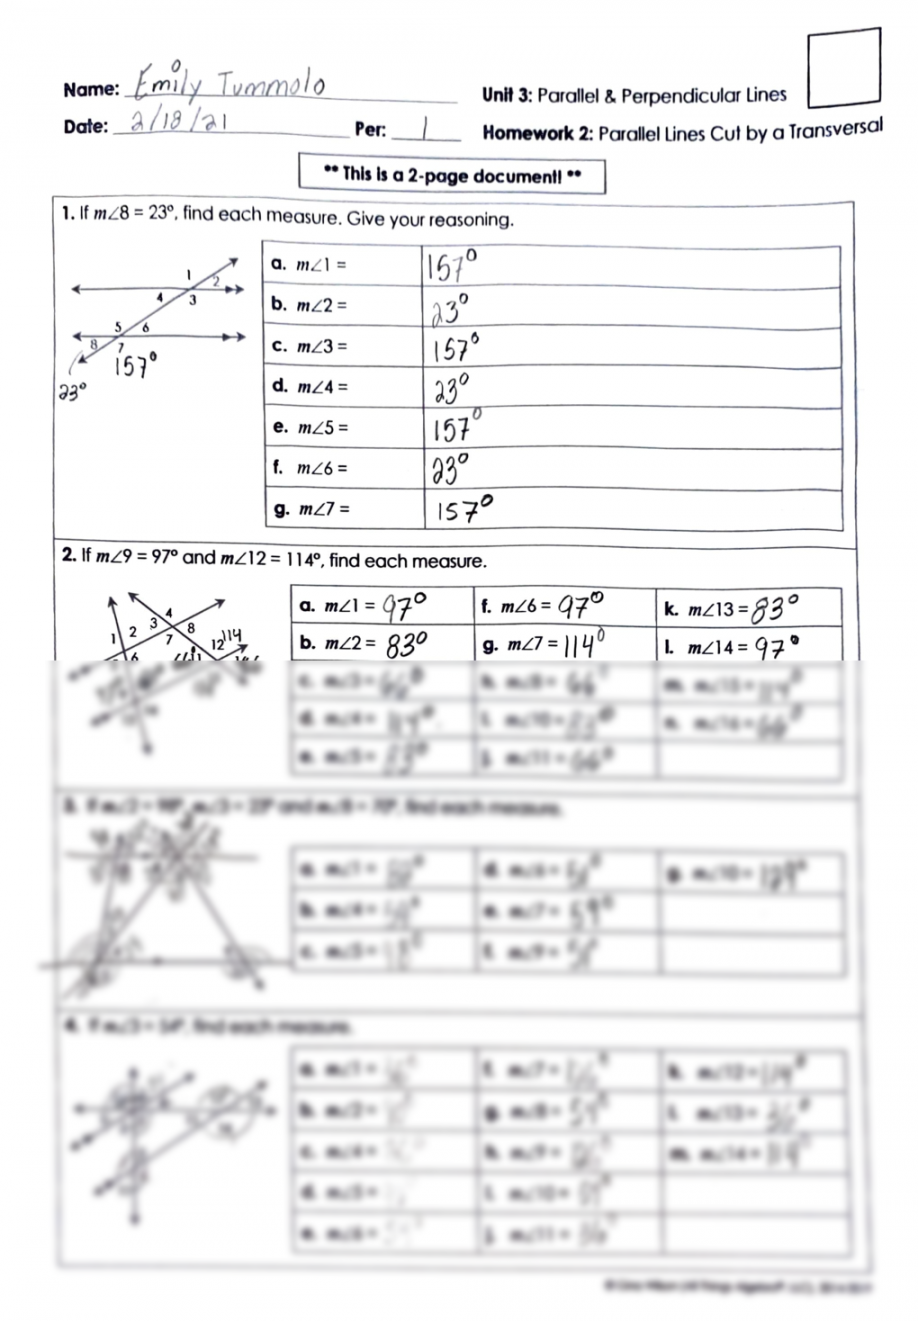 solution unit parallel lines cut by a transversal worksheet